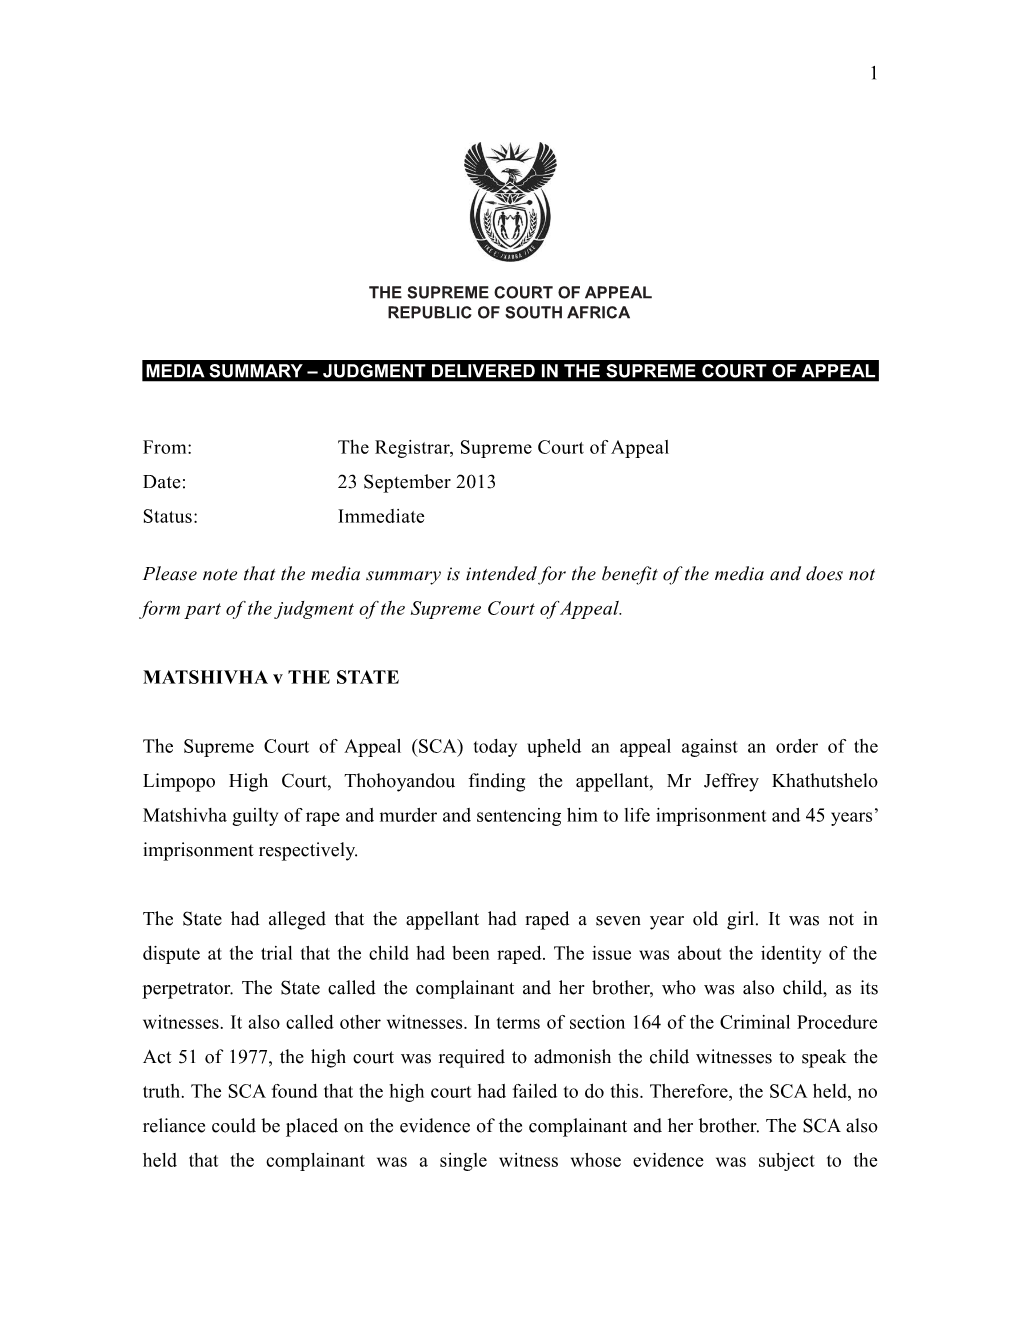 The Appellants Appealed Against an Order Made in the High Court, Pretoria in Terms of Which